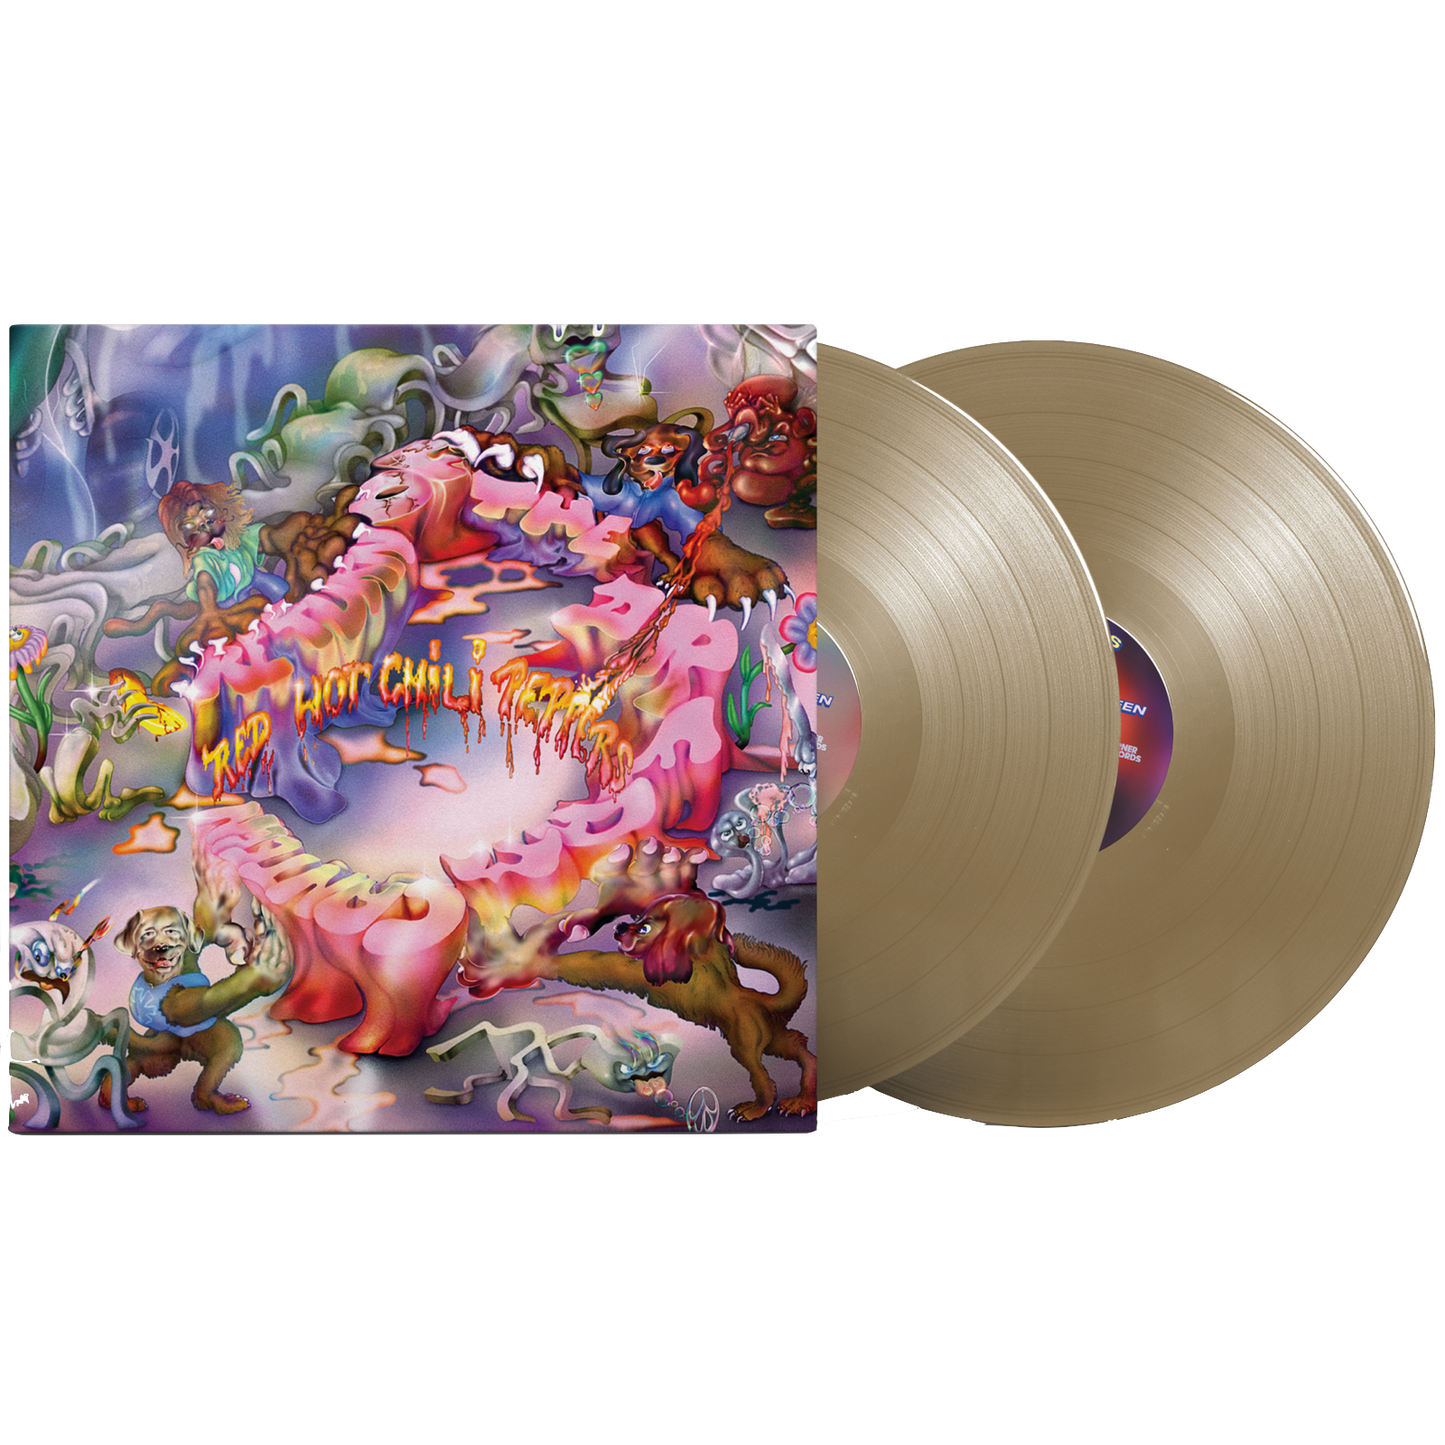 Red Hot Chili Peppers - Return of the Dream Canteen (Indie Exclusive, Gold Color Vinyl) (2 LP) - Joco Records